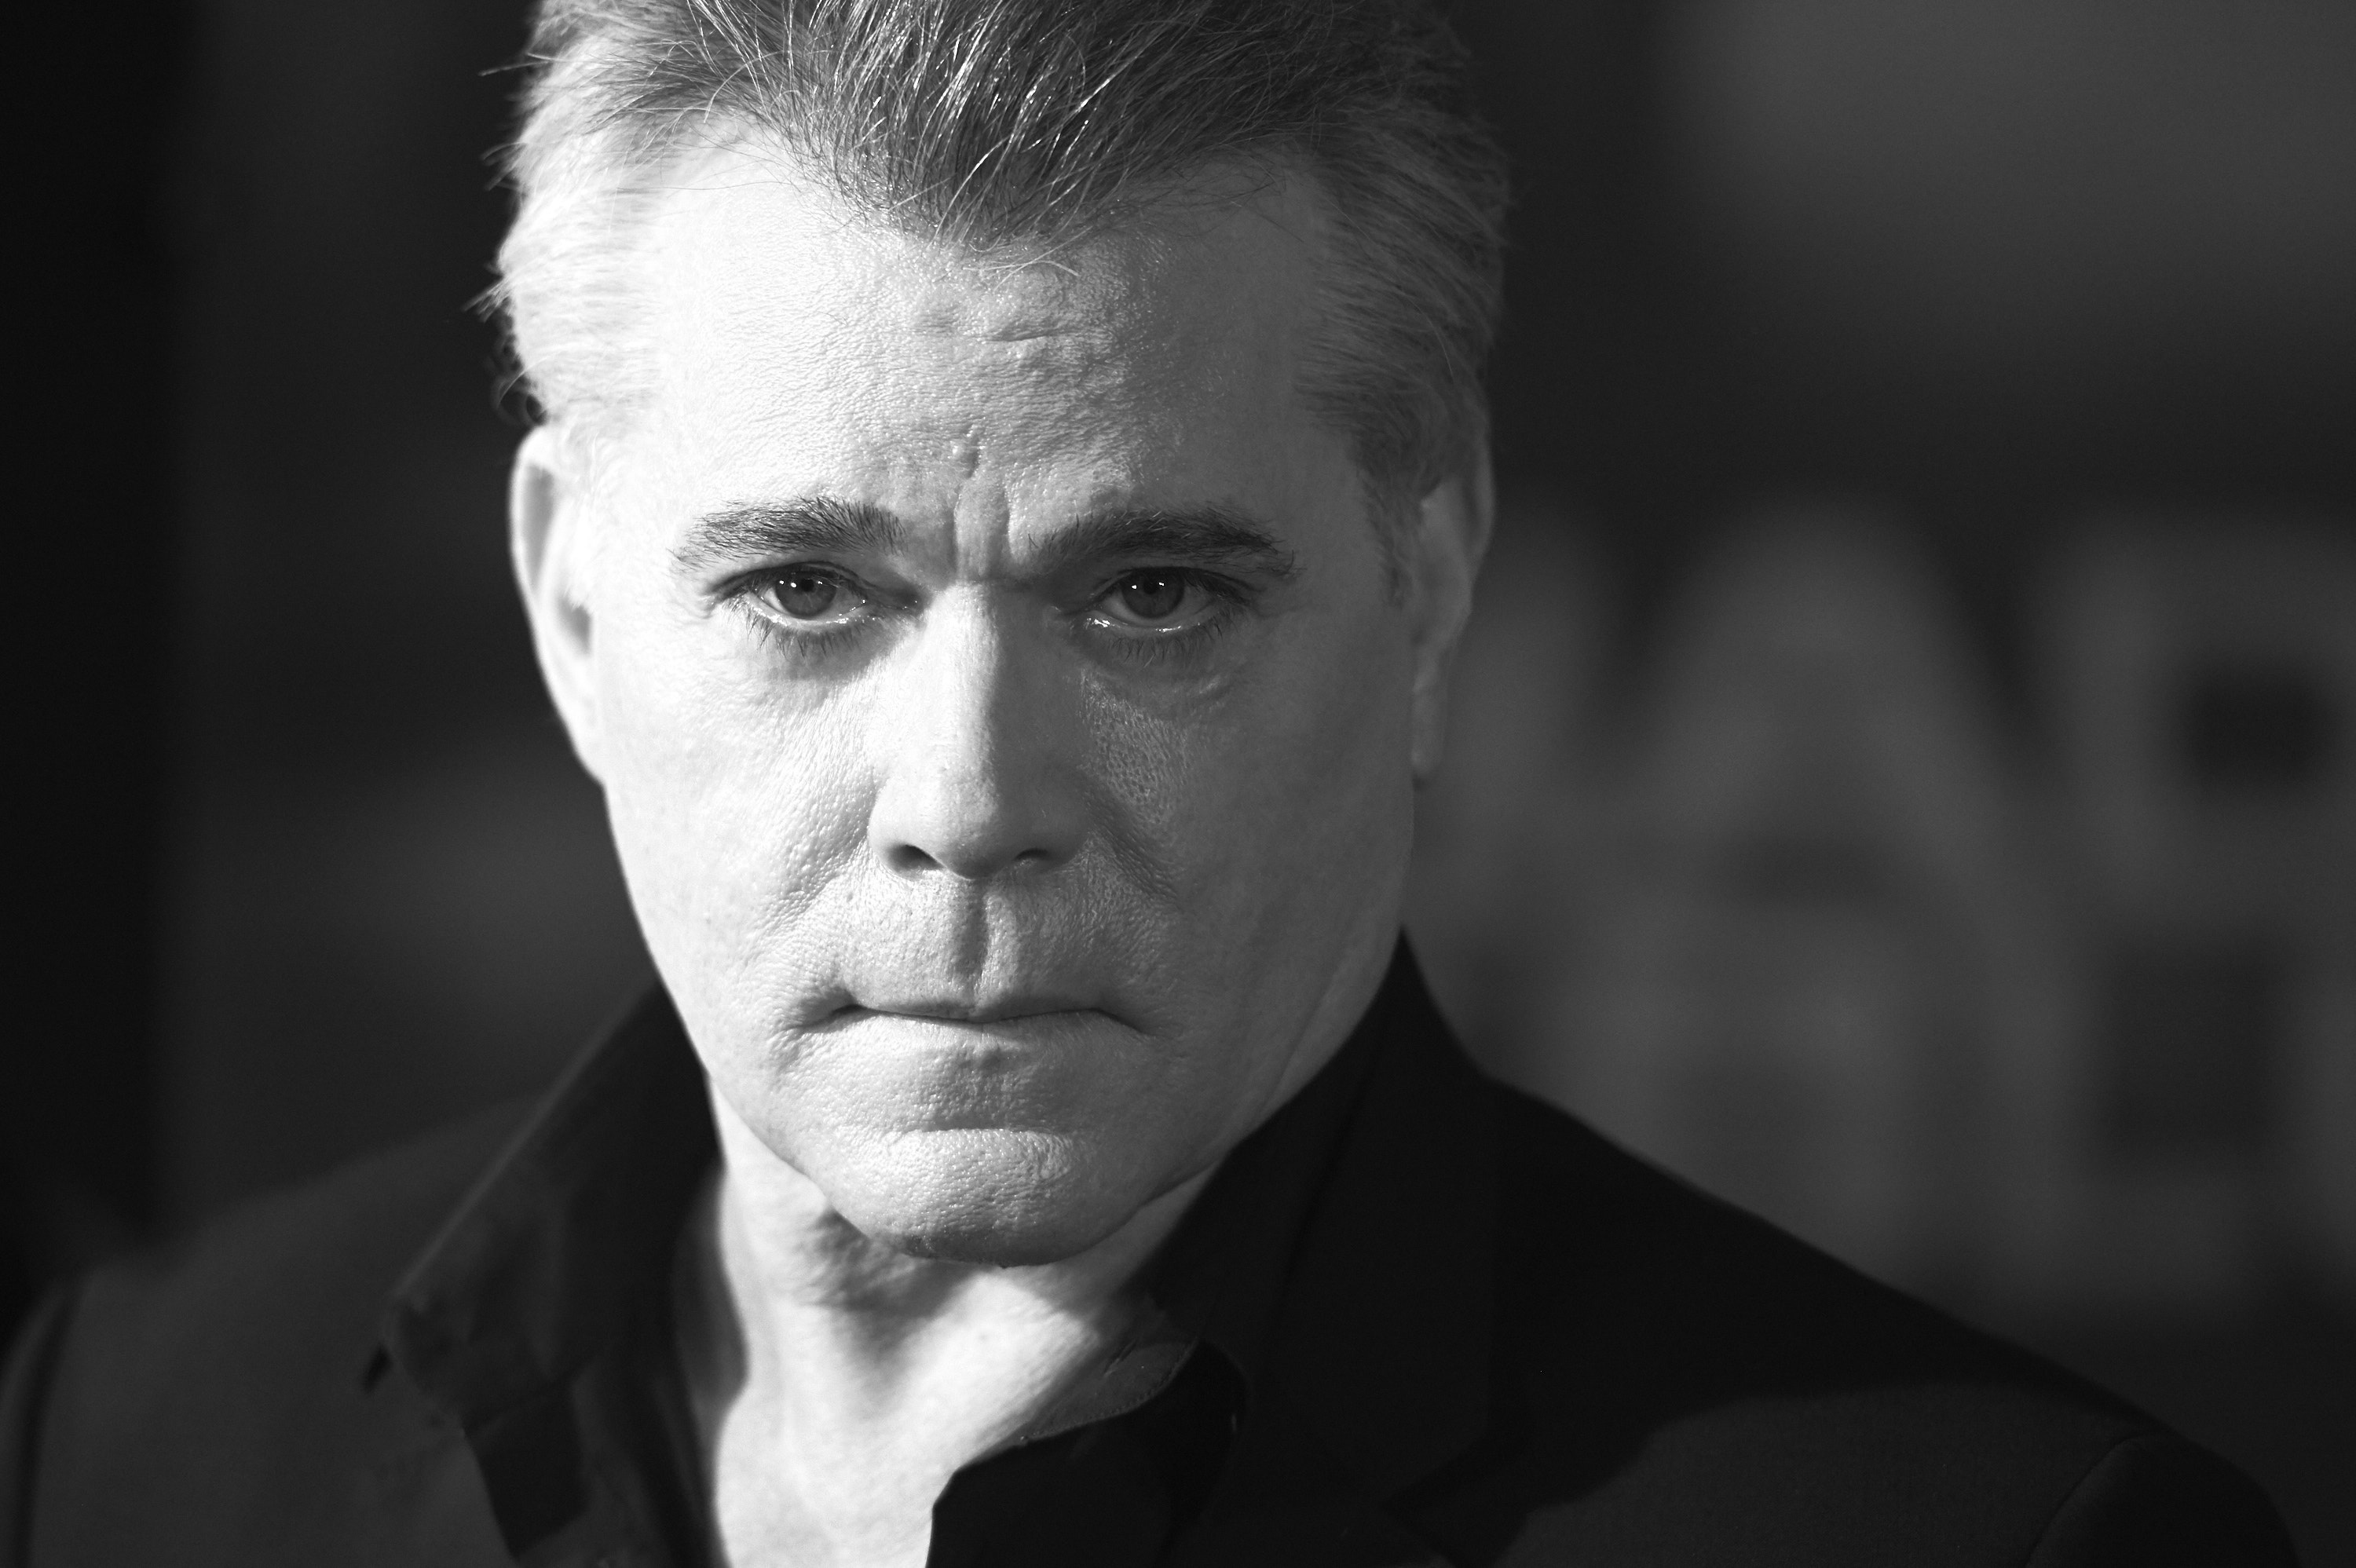 Ray Liotta: Had a prominent voice acting role as Tommy Vercetti in the video game Grand Theft Auto: Vice City. 3000x2000 HD Wallpaper.